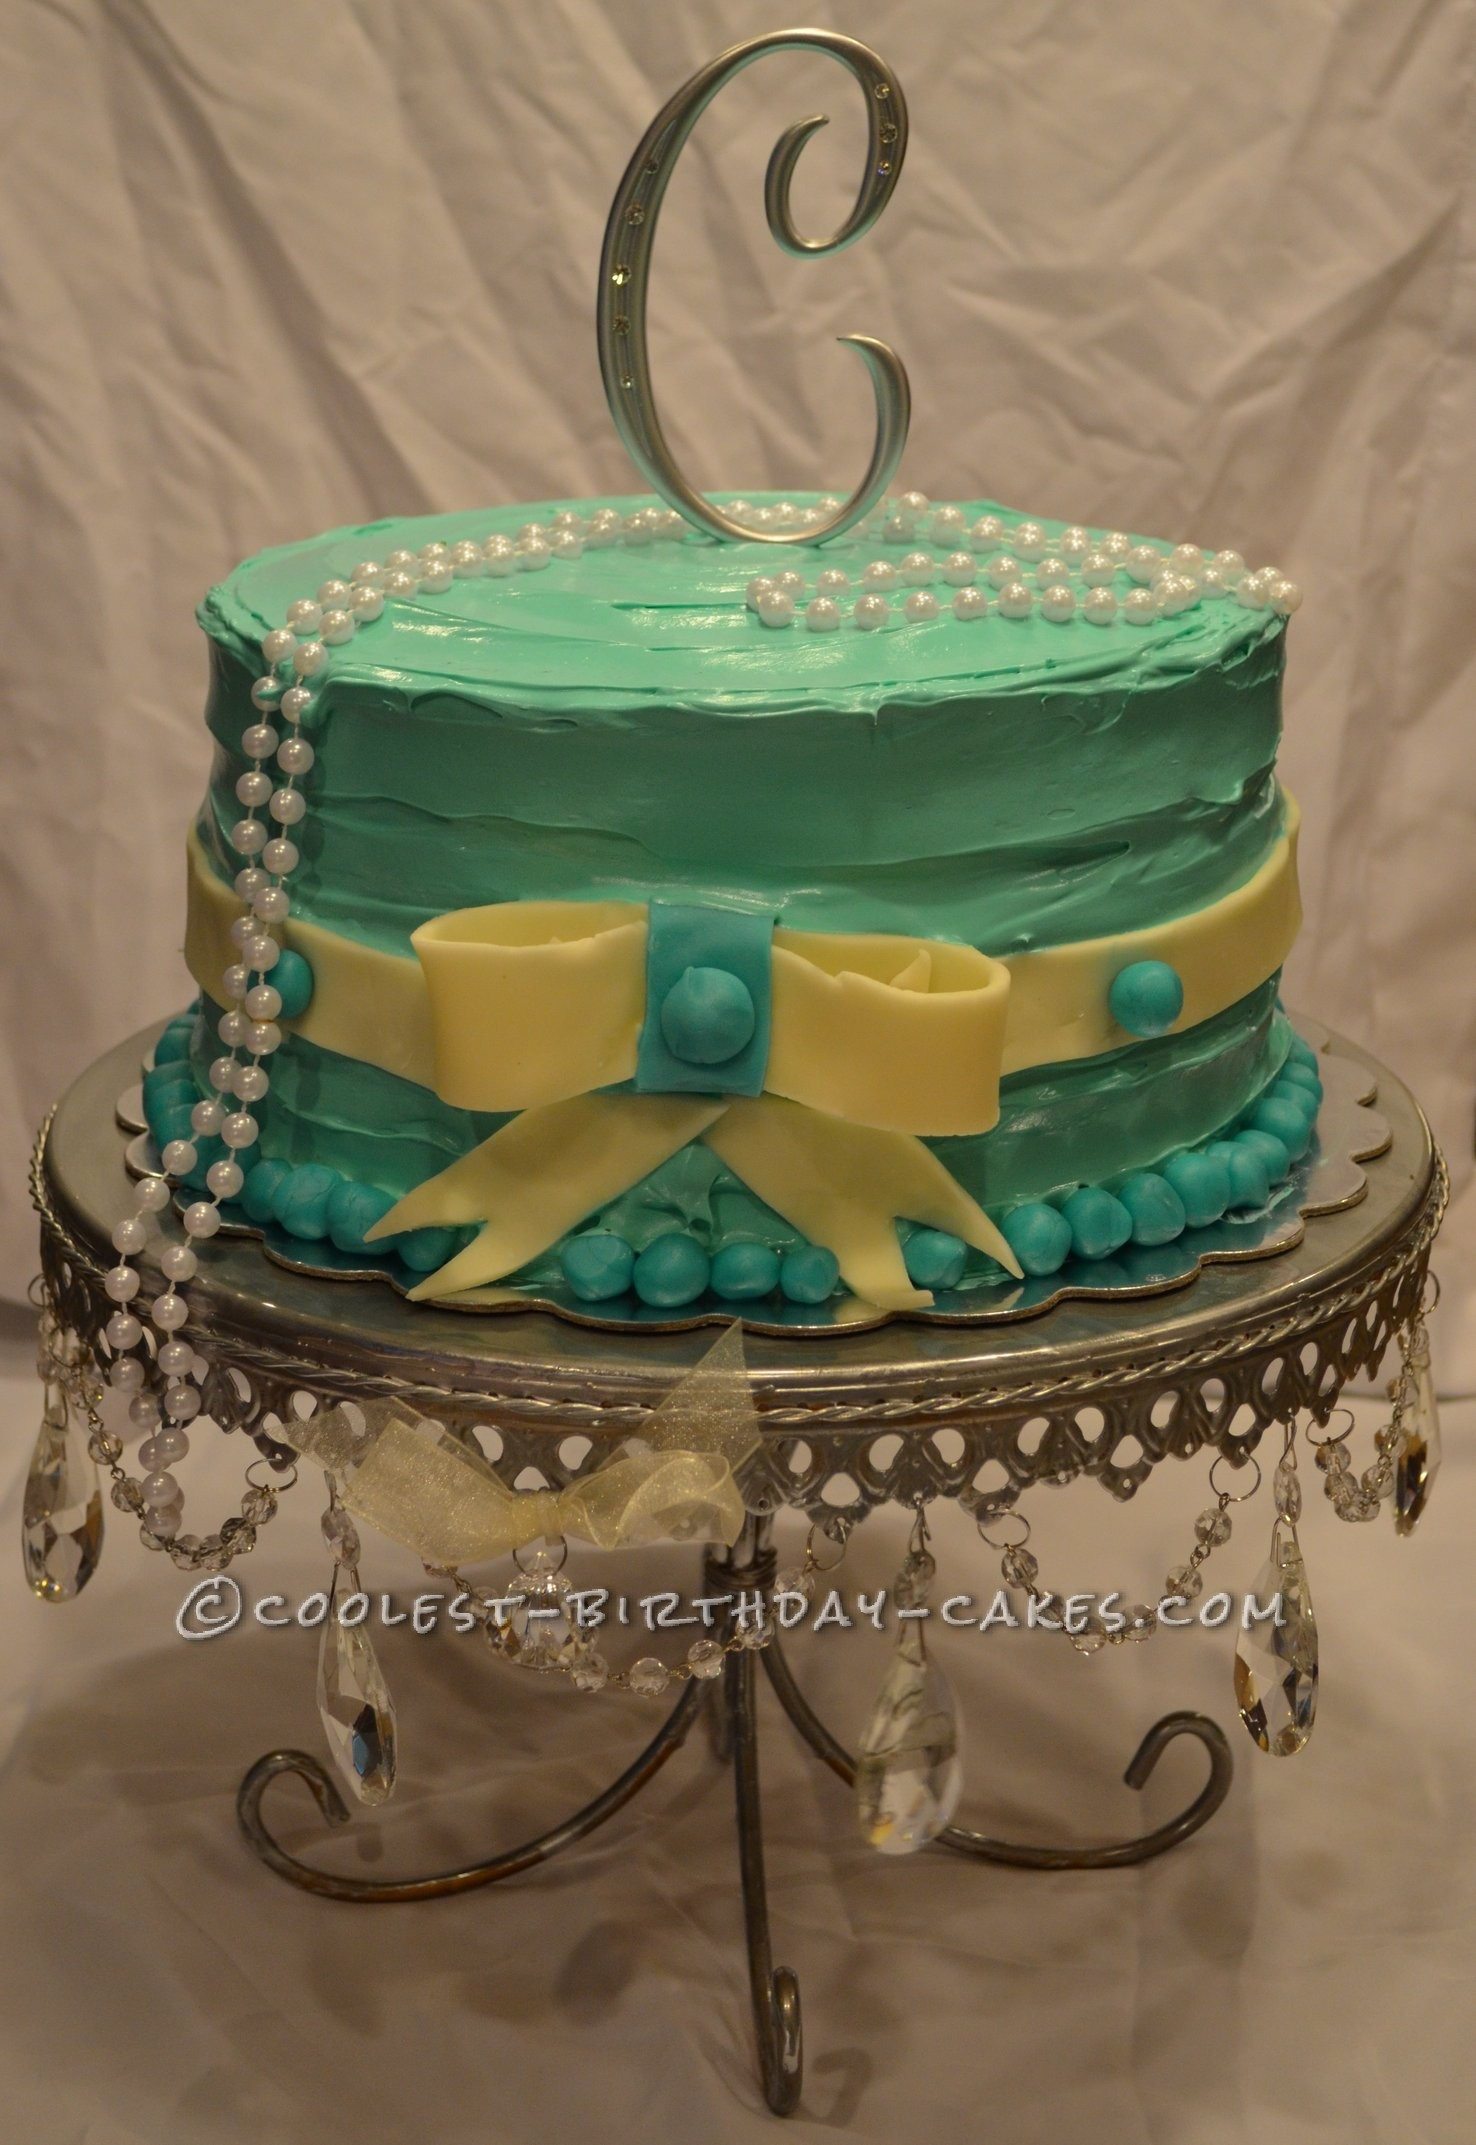 Coolest Birthday Cakes
 Coolest 13th Birthday Tiffany & Co Inspired Cake